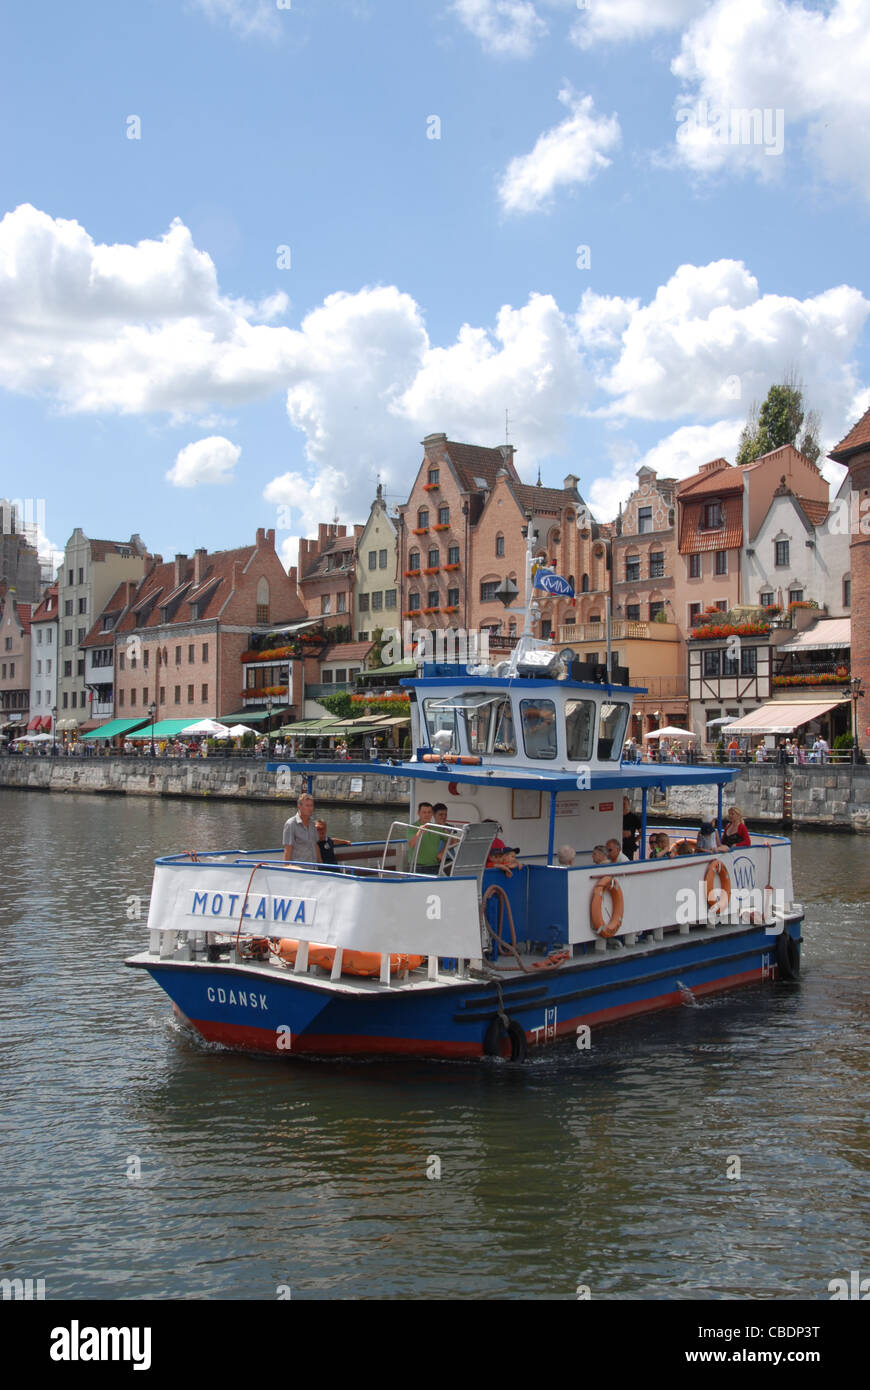 Motlawa ferry shuttling between Oliwianka and Stare Miasto, the old town of Gdansk, Poland Stock Photo